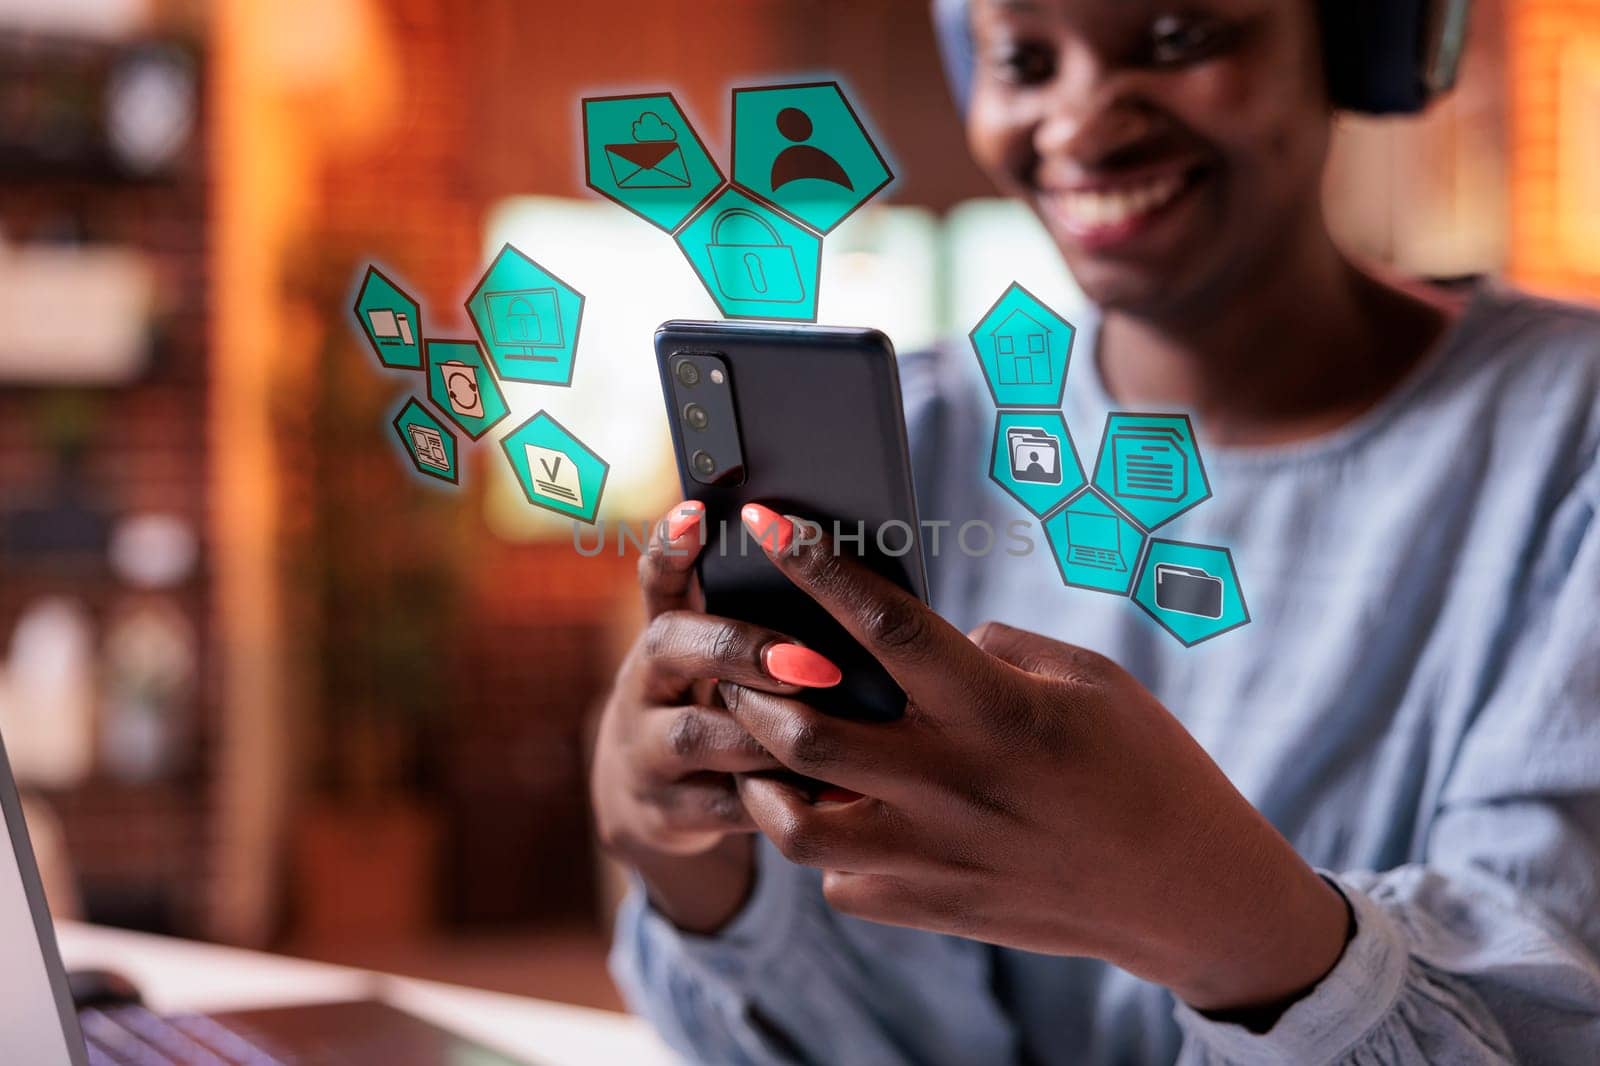 Woman navigating on phone with artificial intelligence pictograms for social networks, internet of things. Girl using multitasking illustrations, search engine optimization for daily tasks.